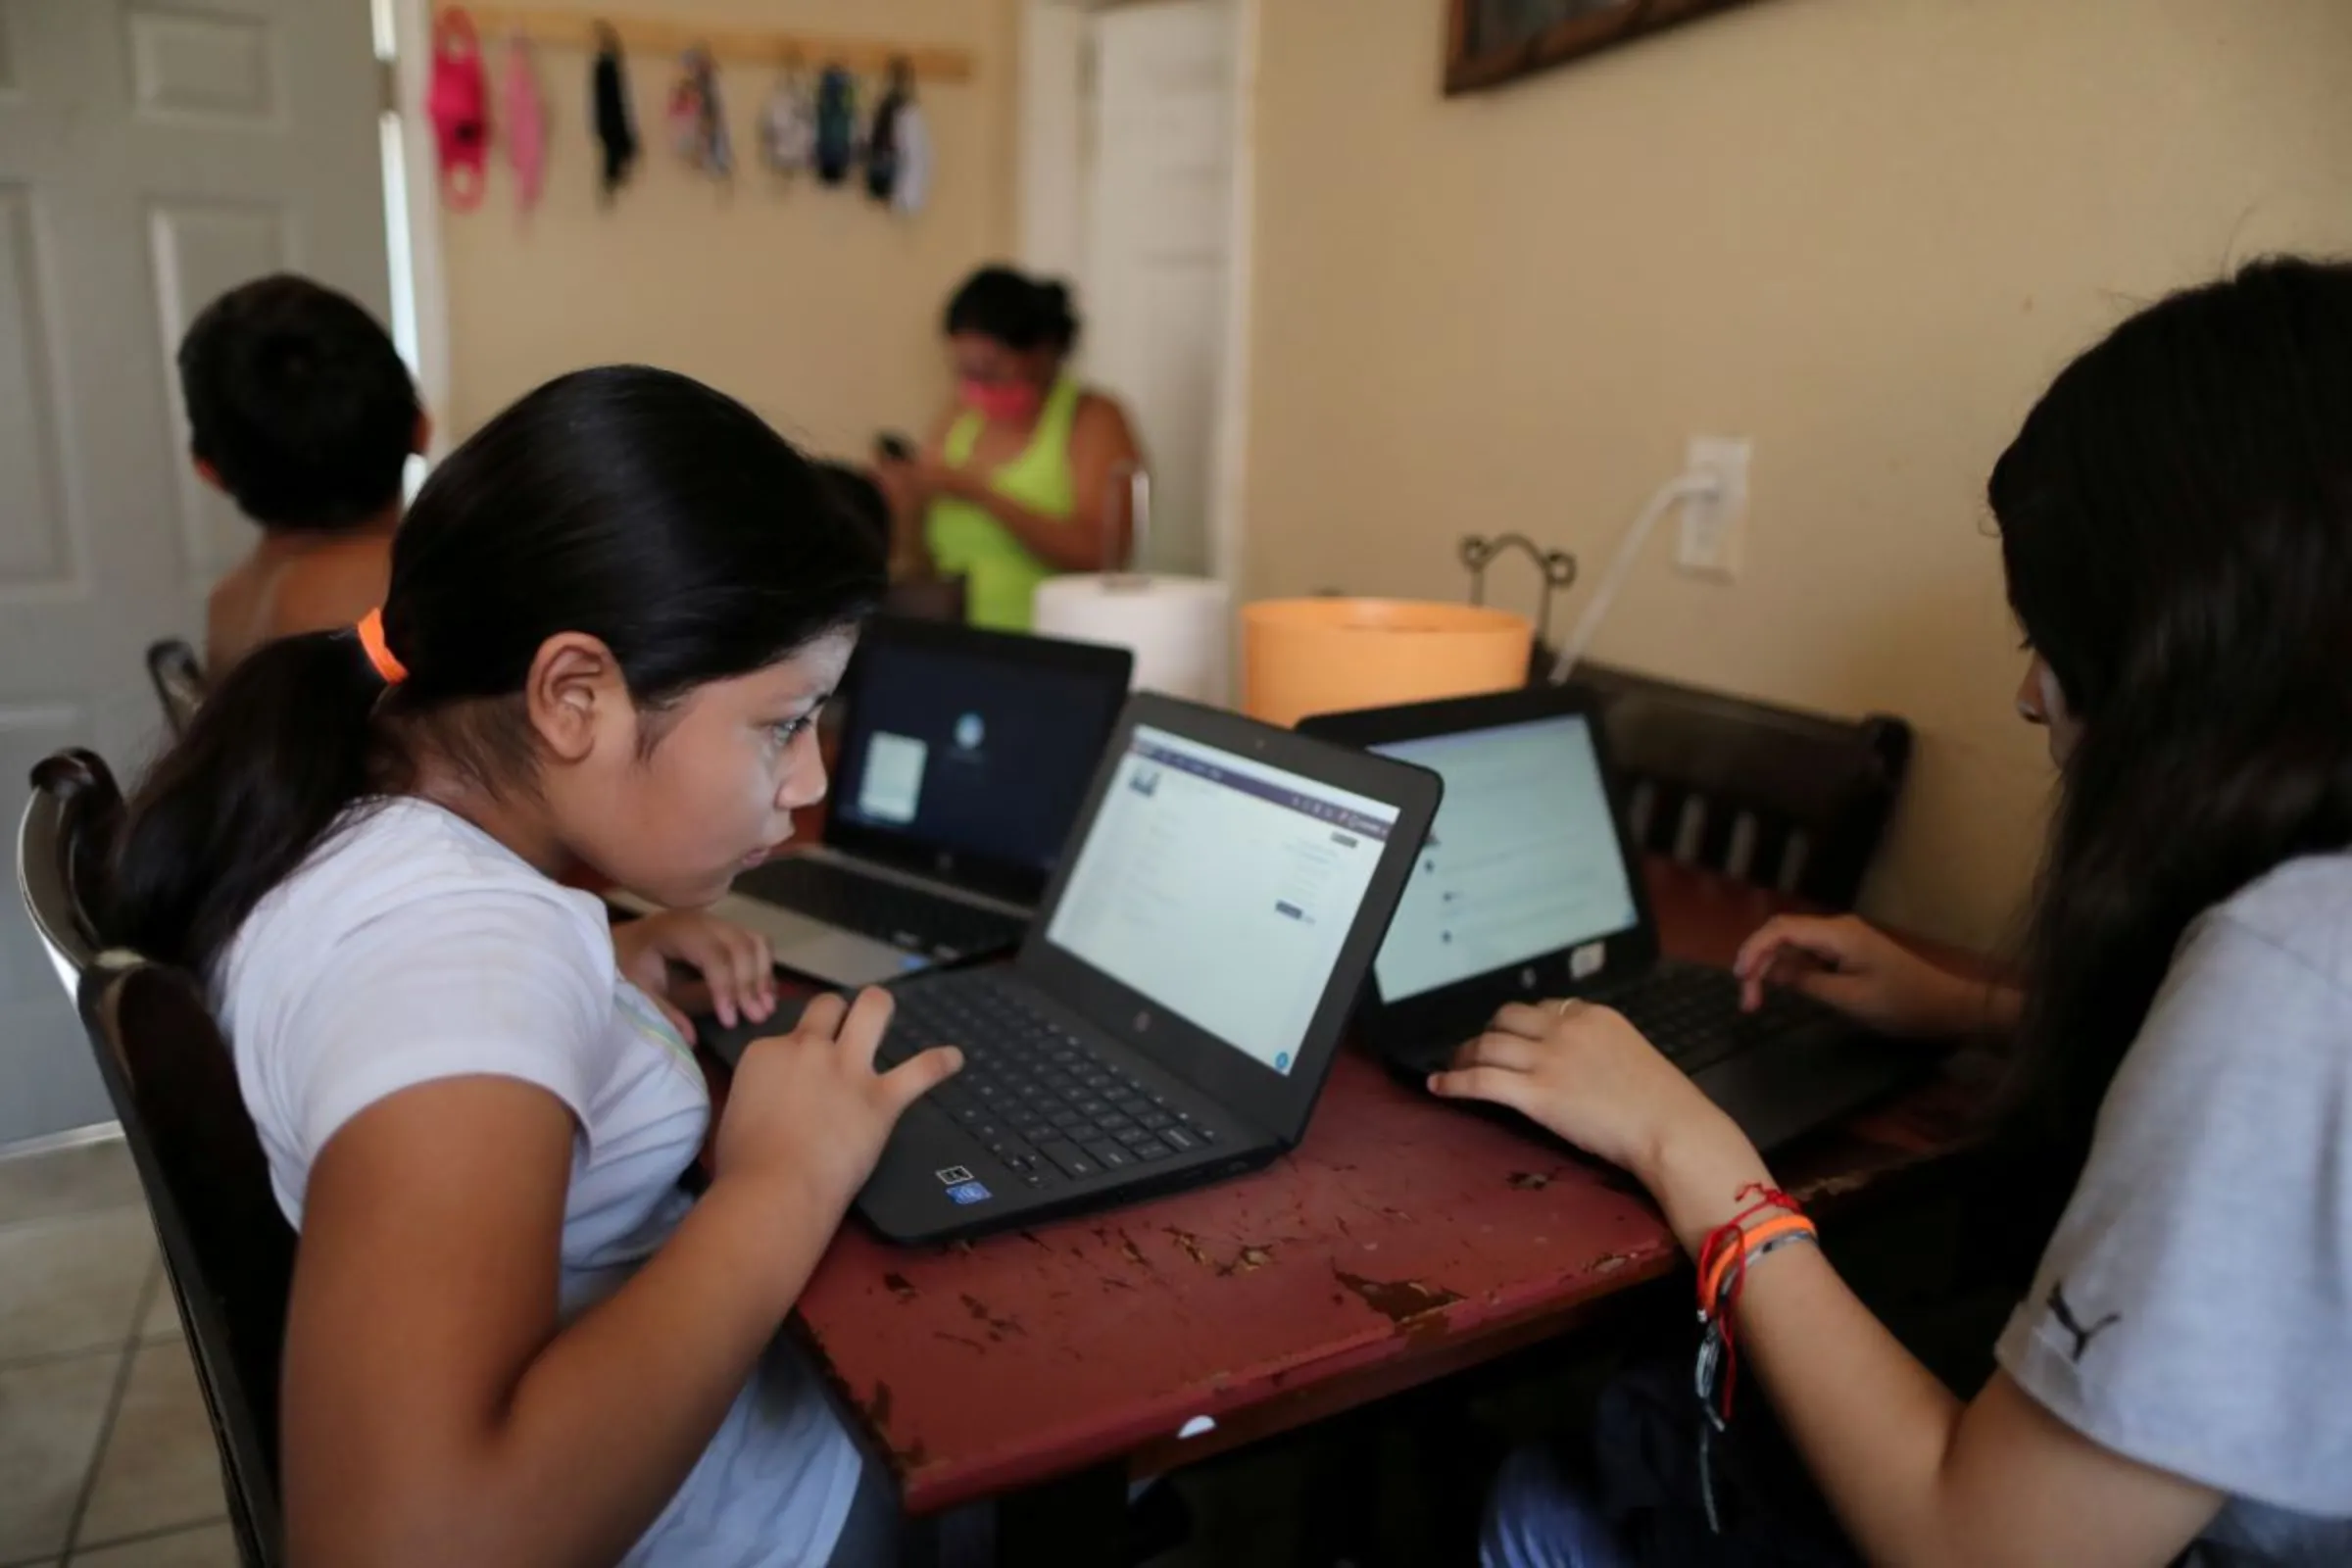 Students work on school-issued computers with unreliable internet connectivity during the global outbreak of the coronavirus disease (COVID-19), in Los Angeles, California, U.S., August 18, 2020. REUTERS/Lucy Nicholson